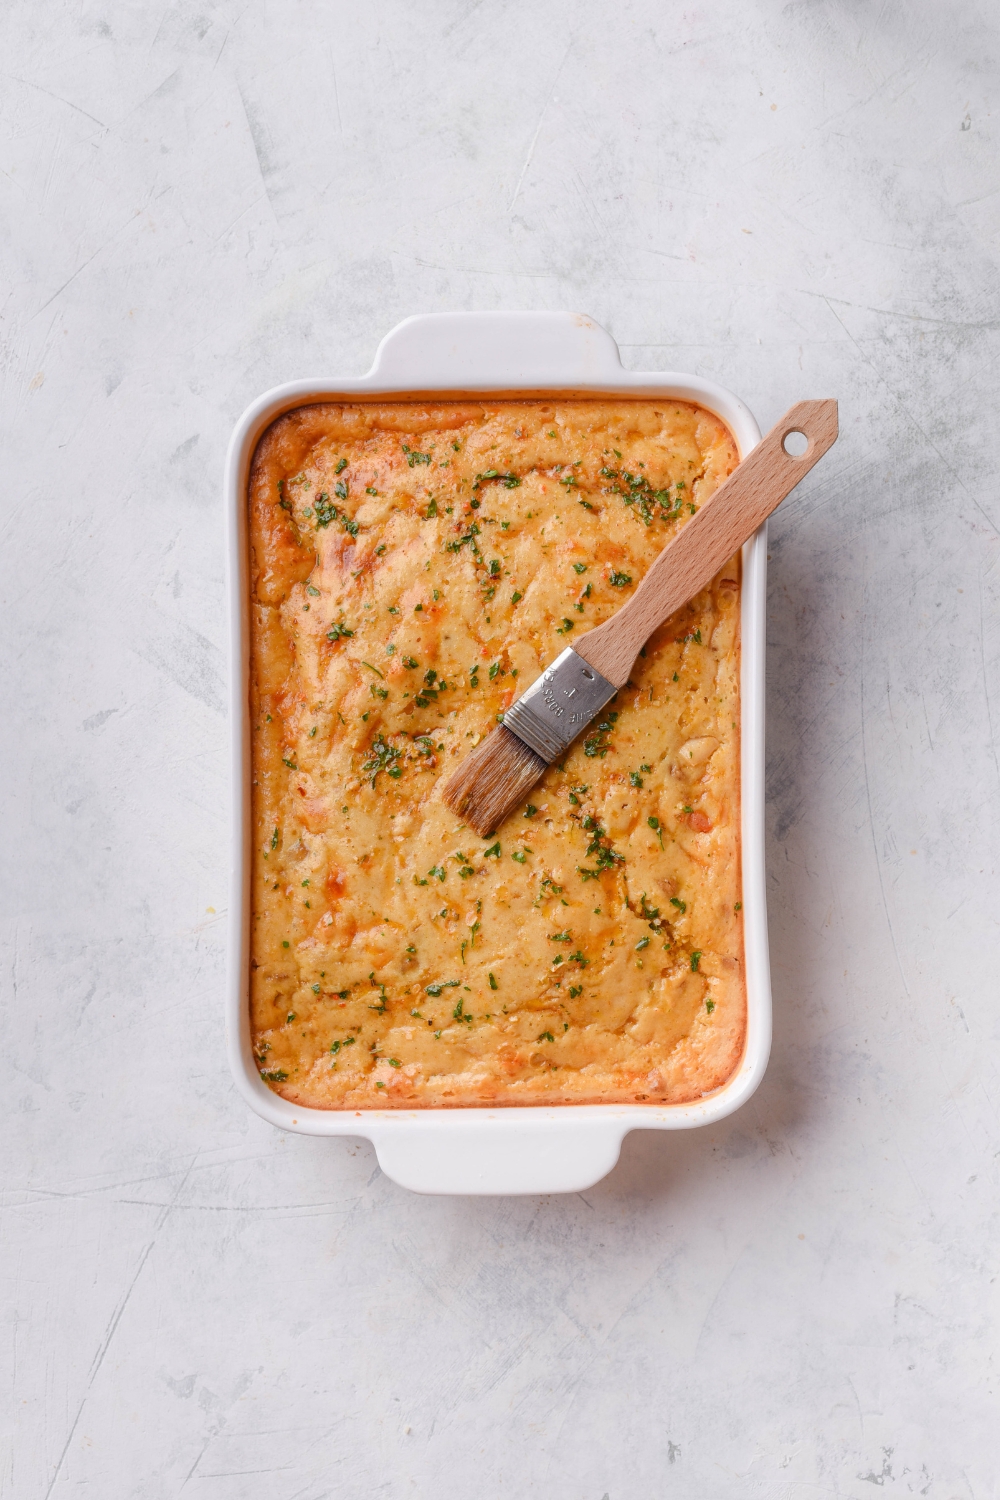 A baking dish filled with freshly baked casserole covered in a biscuit topping that has been brushed with a seasoned butter using a basting brush.